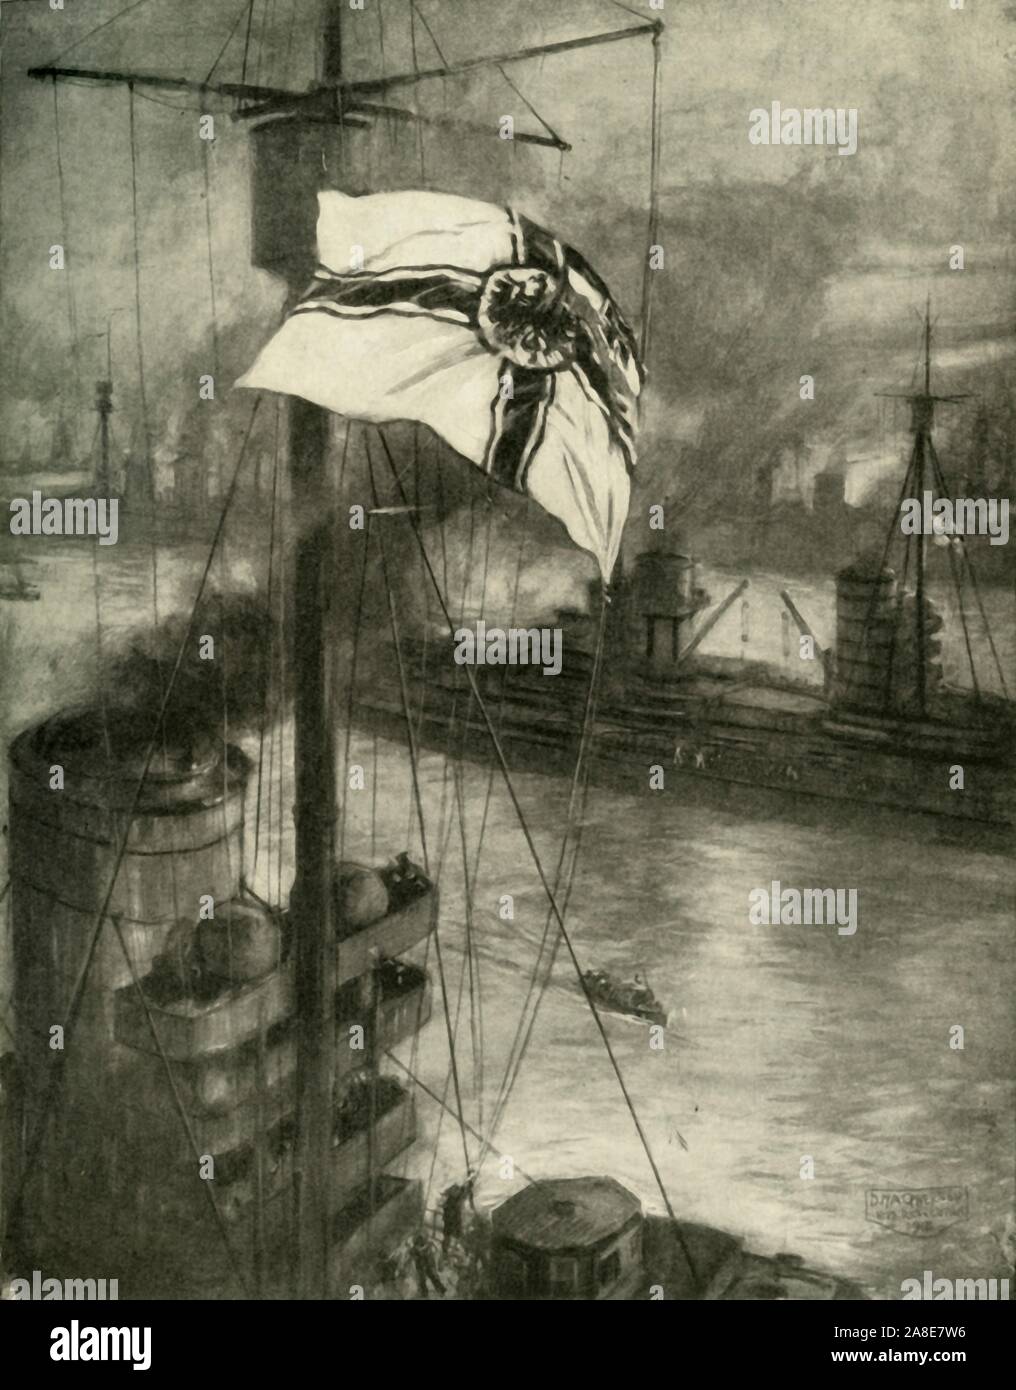 'The Surrender of the German Fleet at Sunset on November 21, 1918', (c1920). German sailors lower the Imperial battle flag on one of the battleships after the First World War armistice. Despite the German ships still belonging to Germany, British Royal Navy Admiral David Beatty insisted they could no longer fly their ensigns, technically a breach of maritime law. Drawn by Douglas Macpherson, on board HMS 'Resolution'. From &quot;The Great World War: A History&quot;, Volume IX, edited by Frank A Mumby. [The Gresham Publishing Company Ltd, London, c1920] Stock Photo